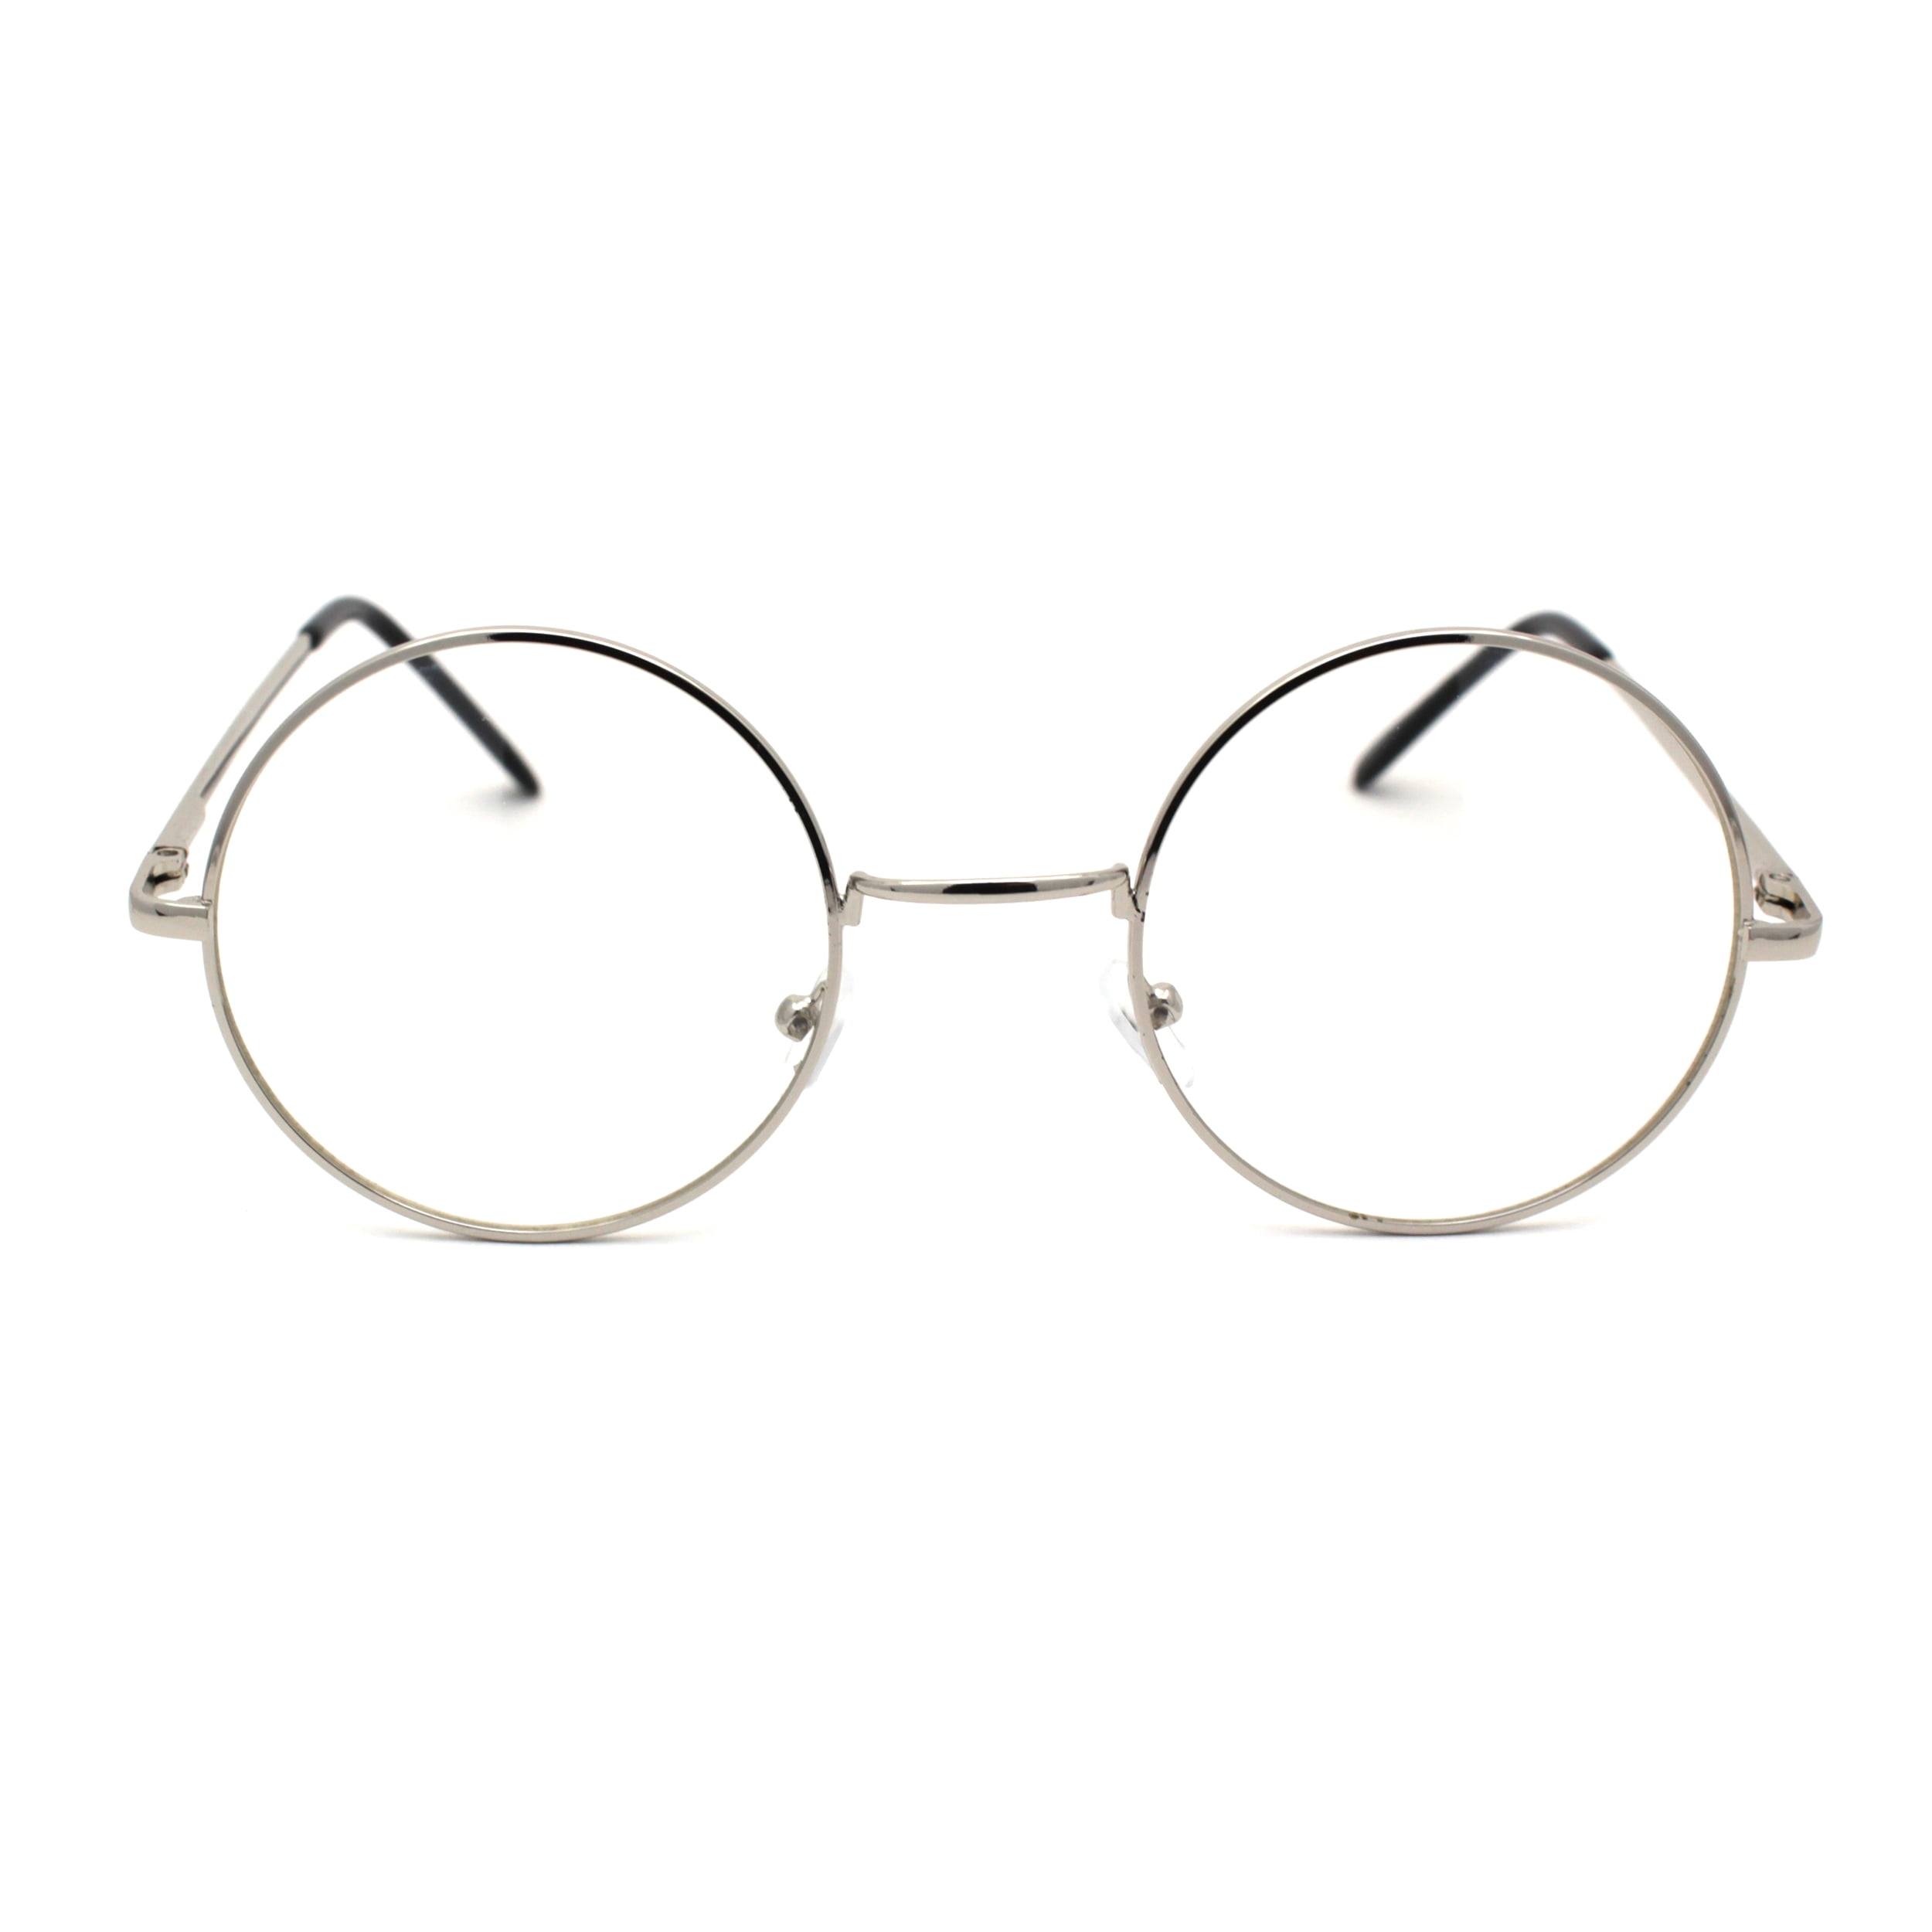 Iconic 70s Round Circle Lens Musician Hippie Eyeglasses Silver ...